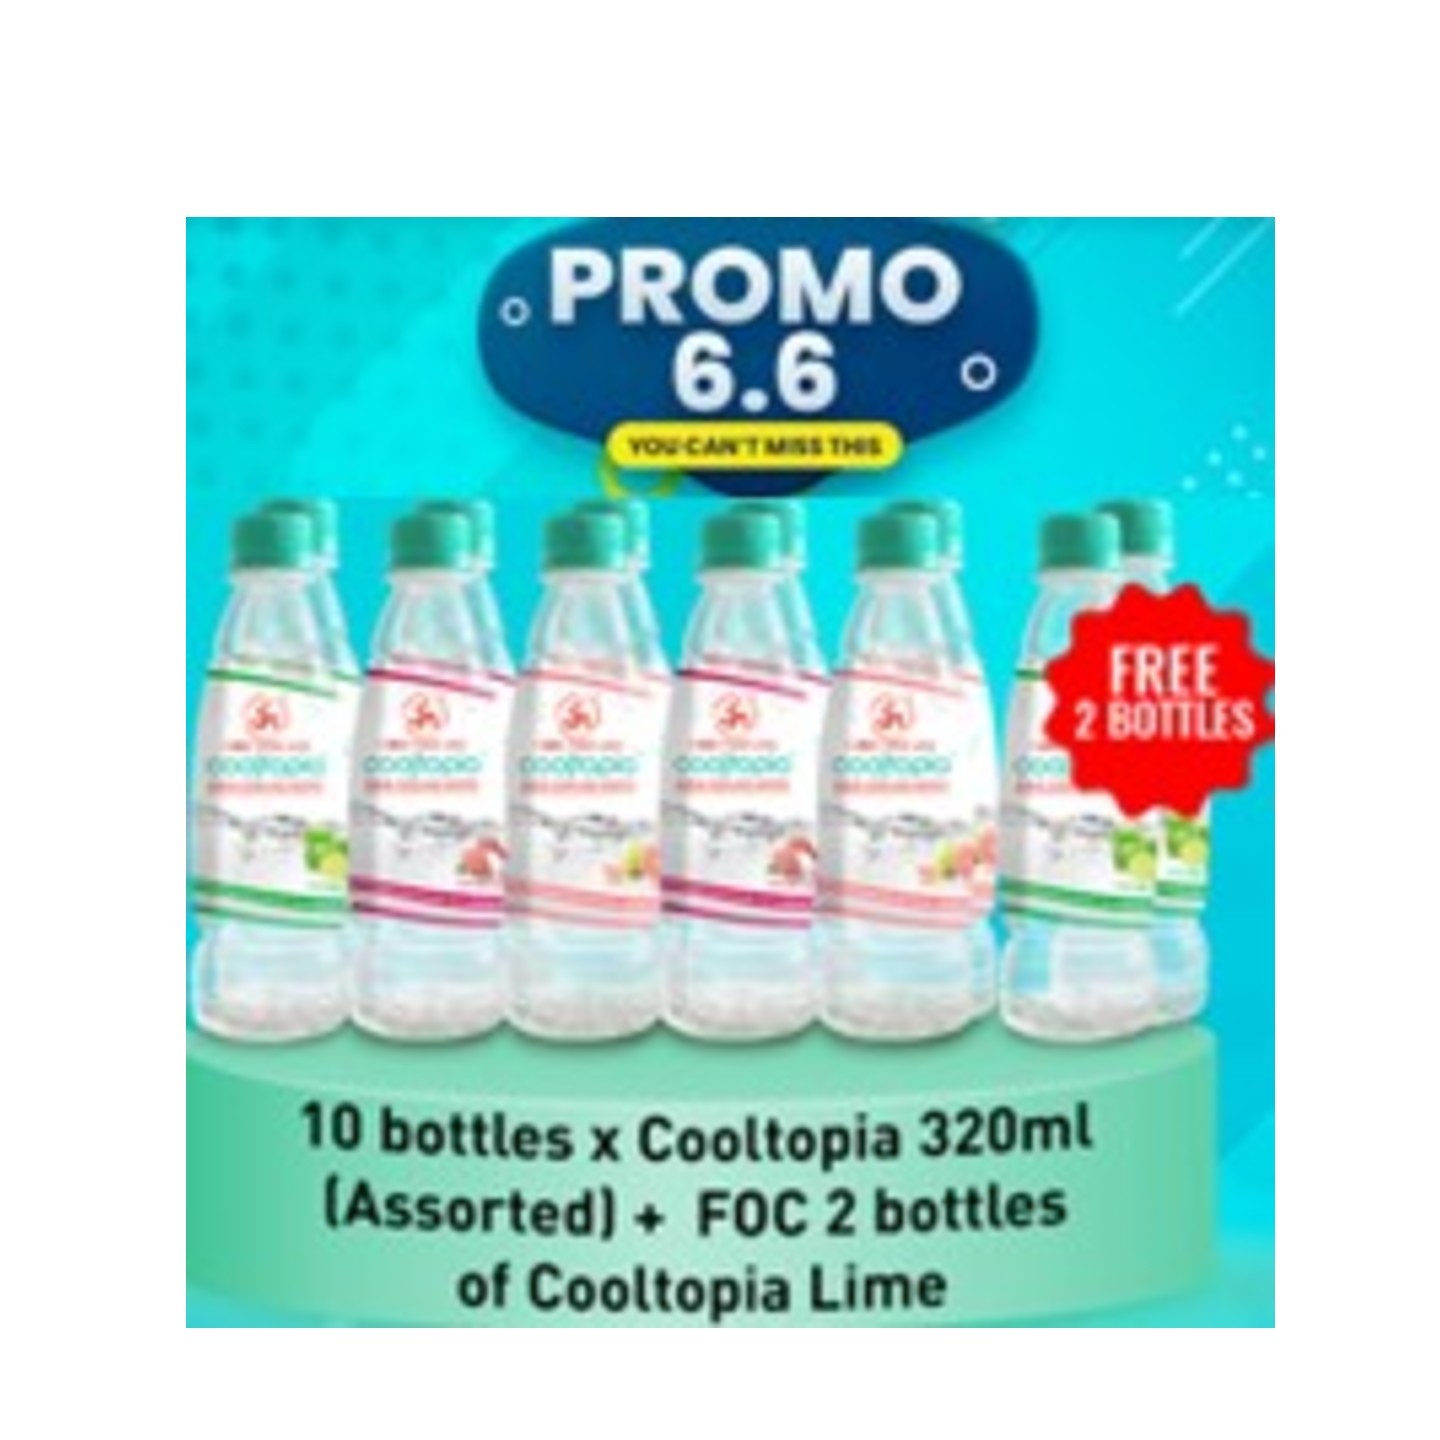 PACKAGE 2: COOLTOPIA COOLING WATER - GUAVA 320ML X 10 + FOC COOLTOPIA COOLING WATER - LIME X 2